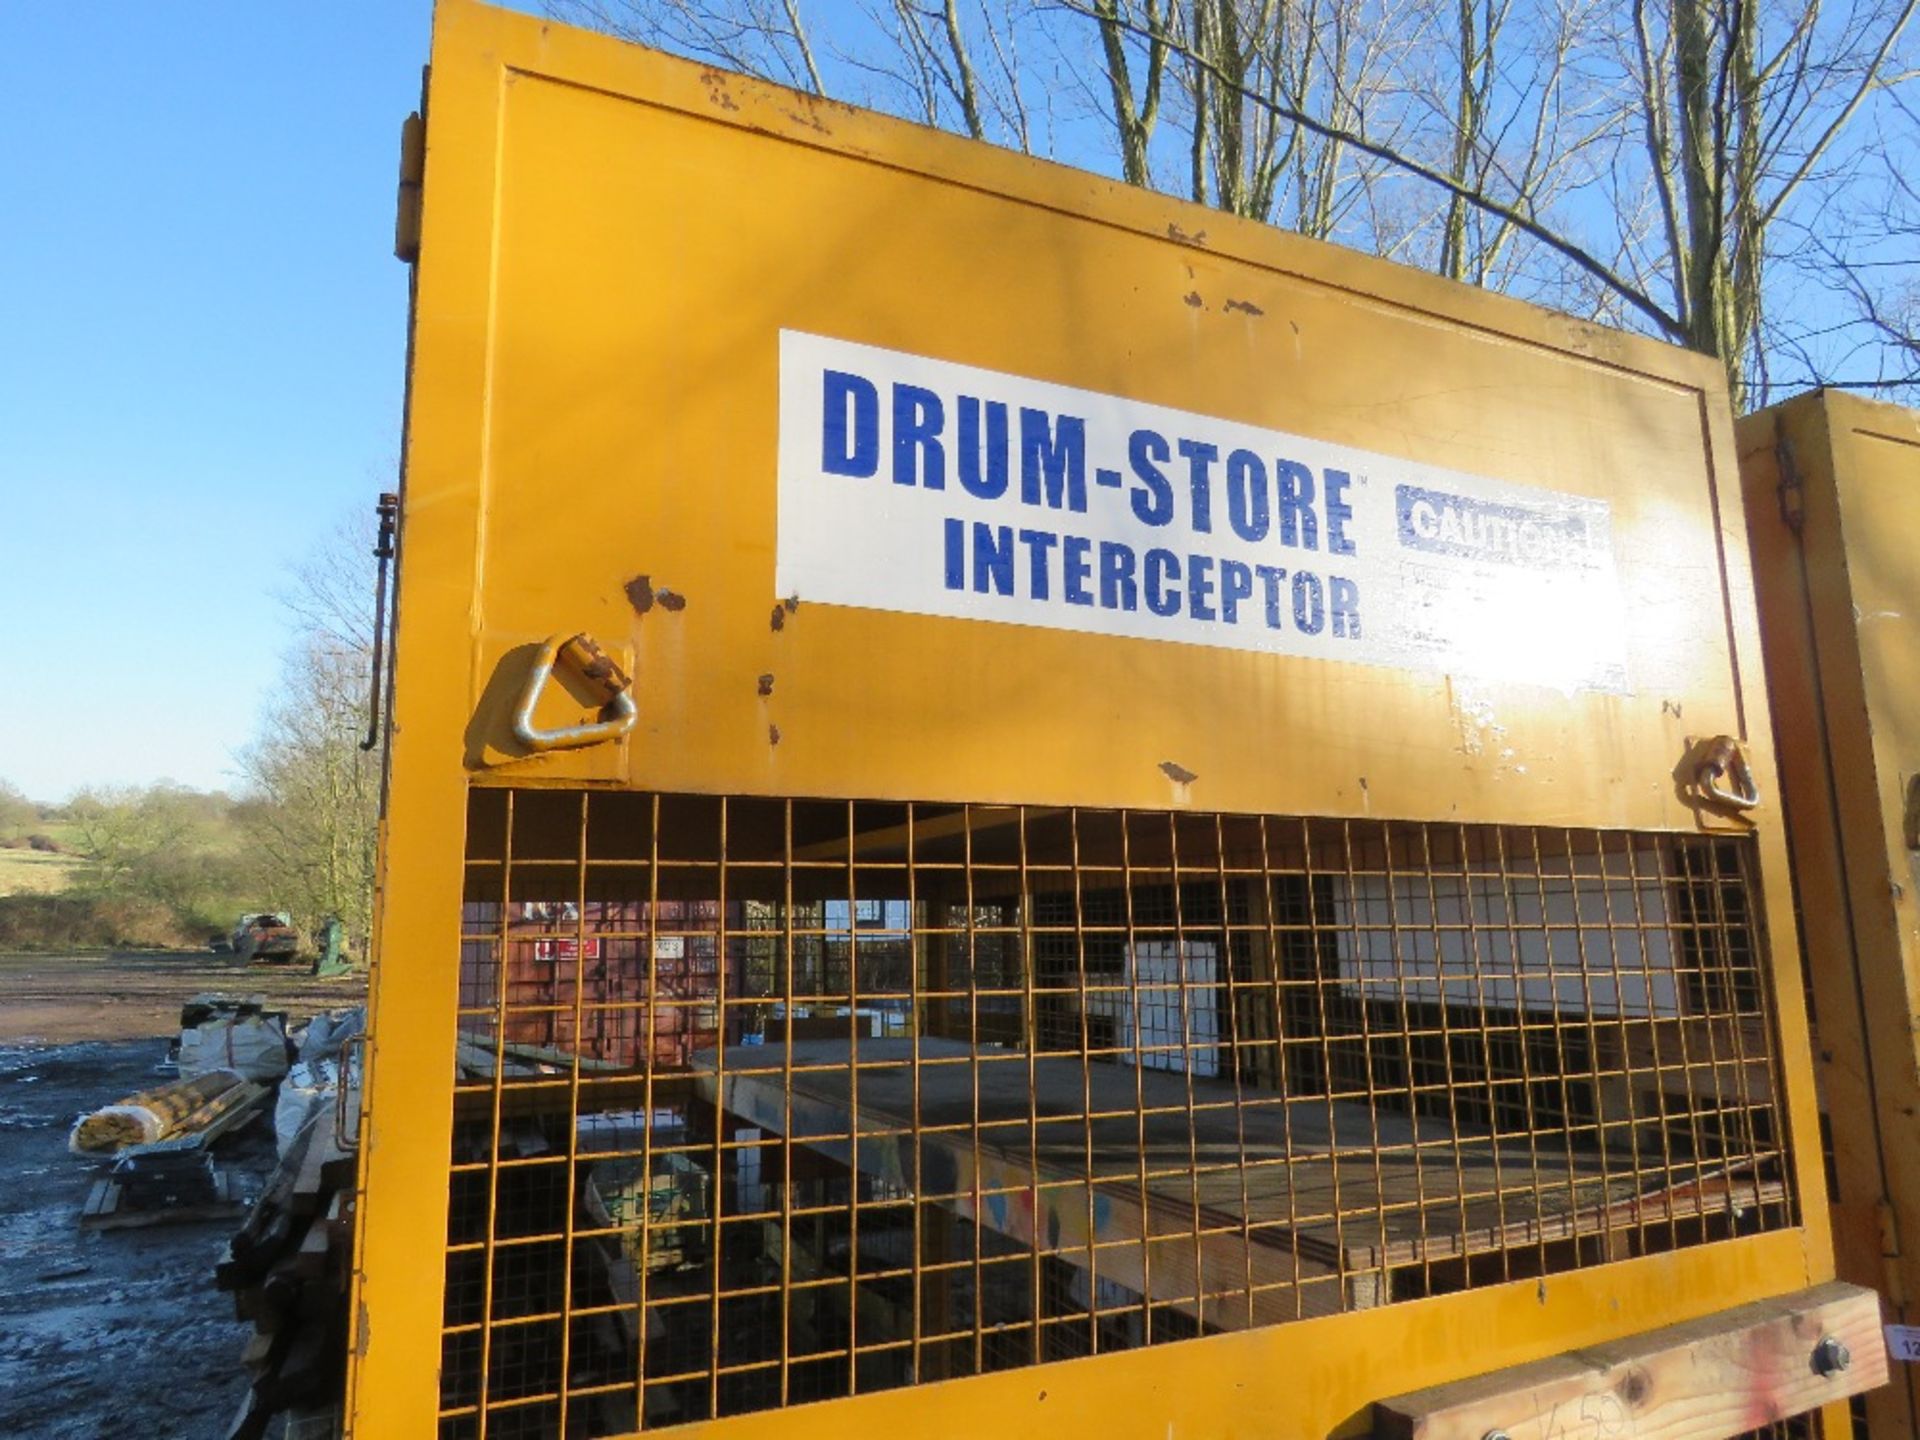 DRUM-STORE INTERCEPTOR LOCKABLE STORAGE CAGE WITH BUNDED BASE.SIZE: 5FT X 8FT X 100" HEIGHT APPROX. - Image 2 of 5